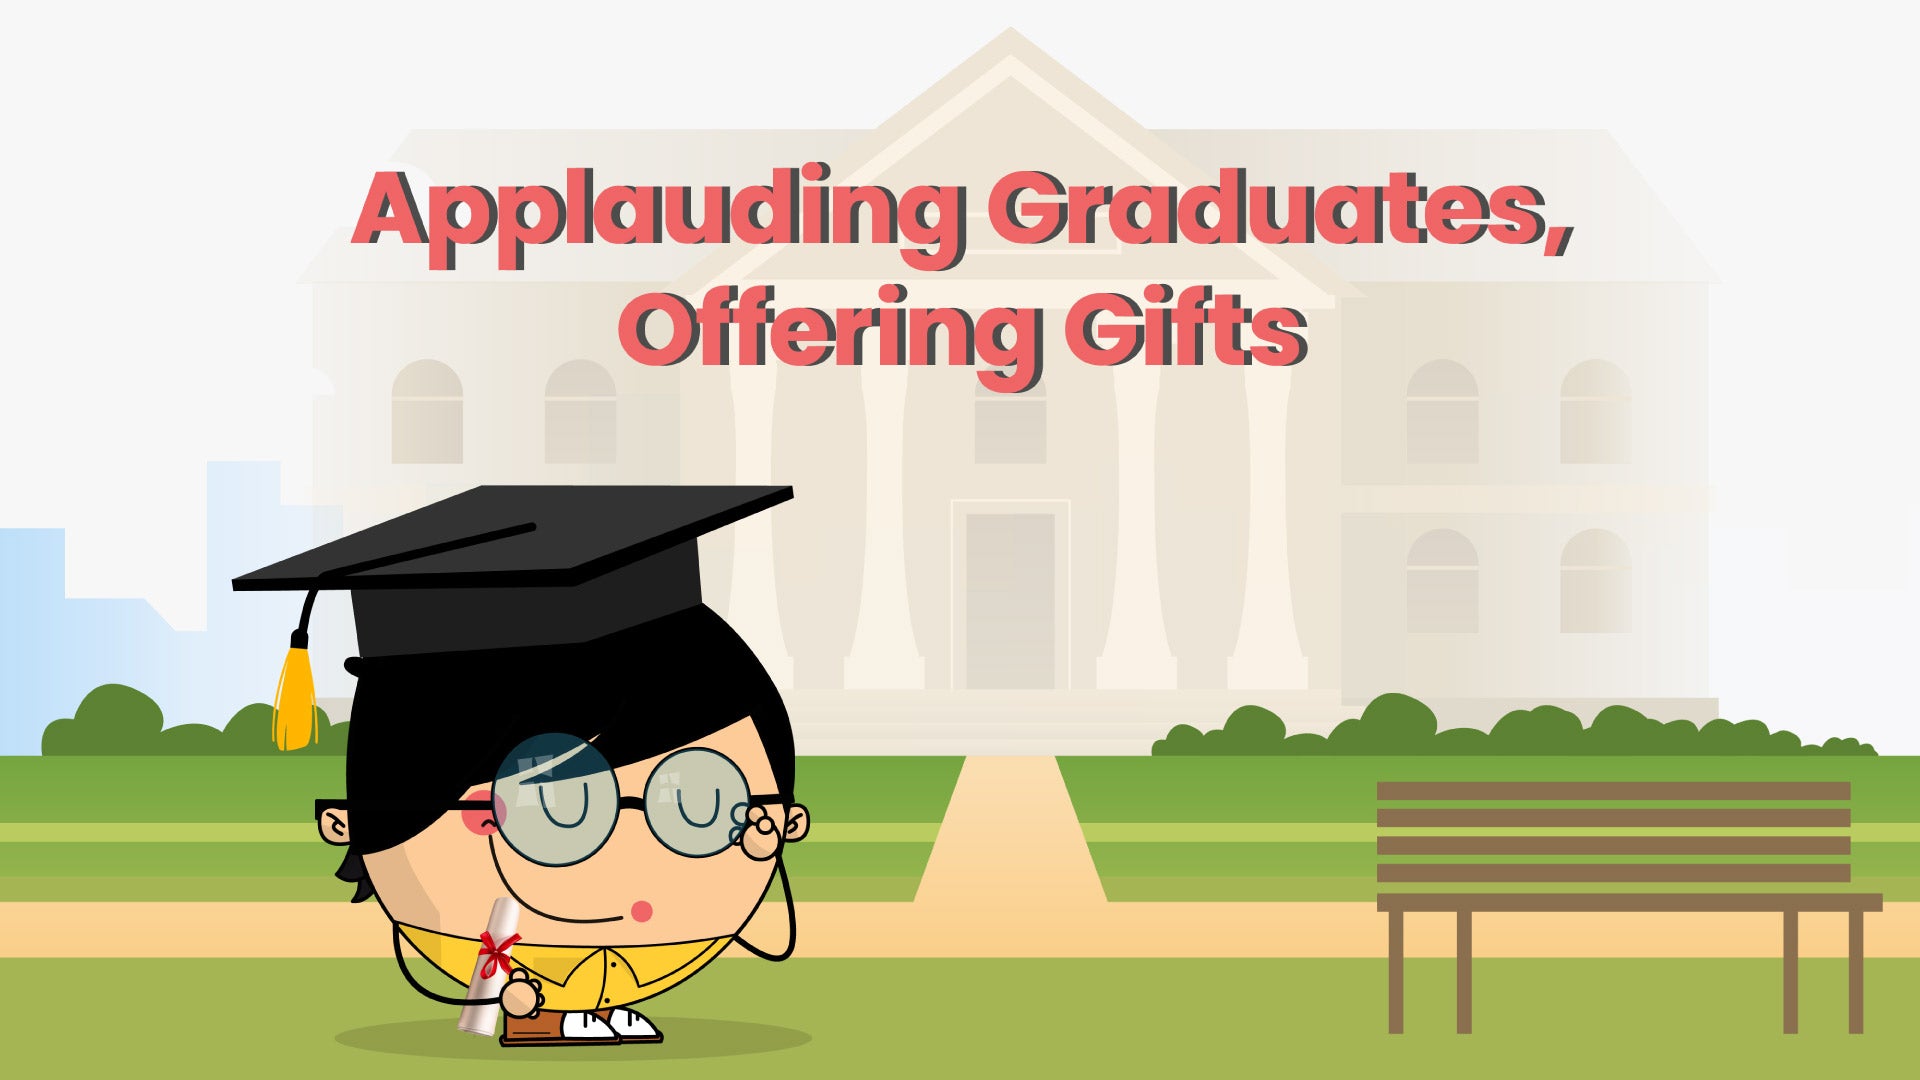 Great Gift Ideas for Graduates